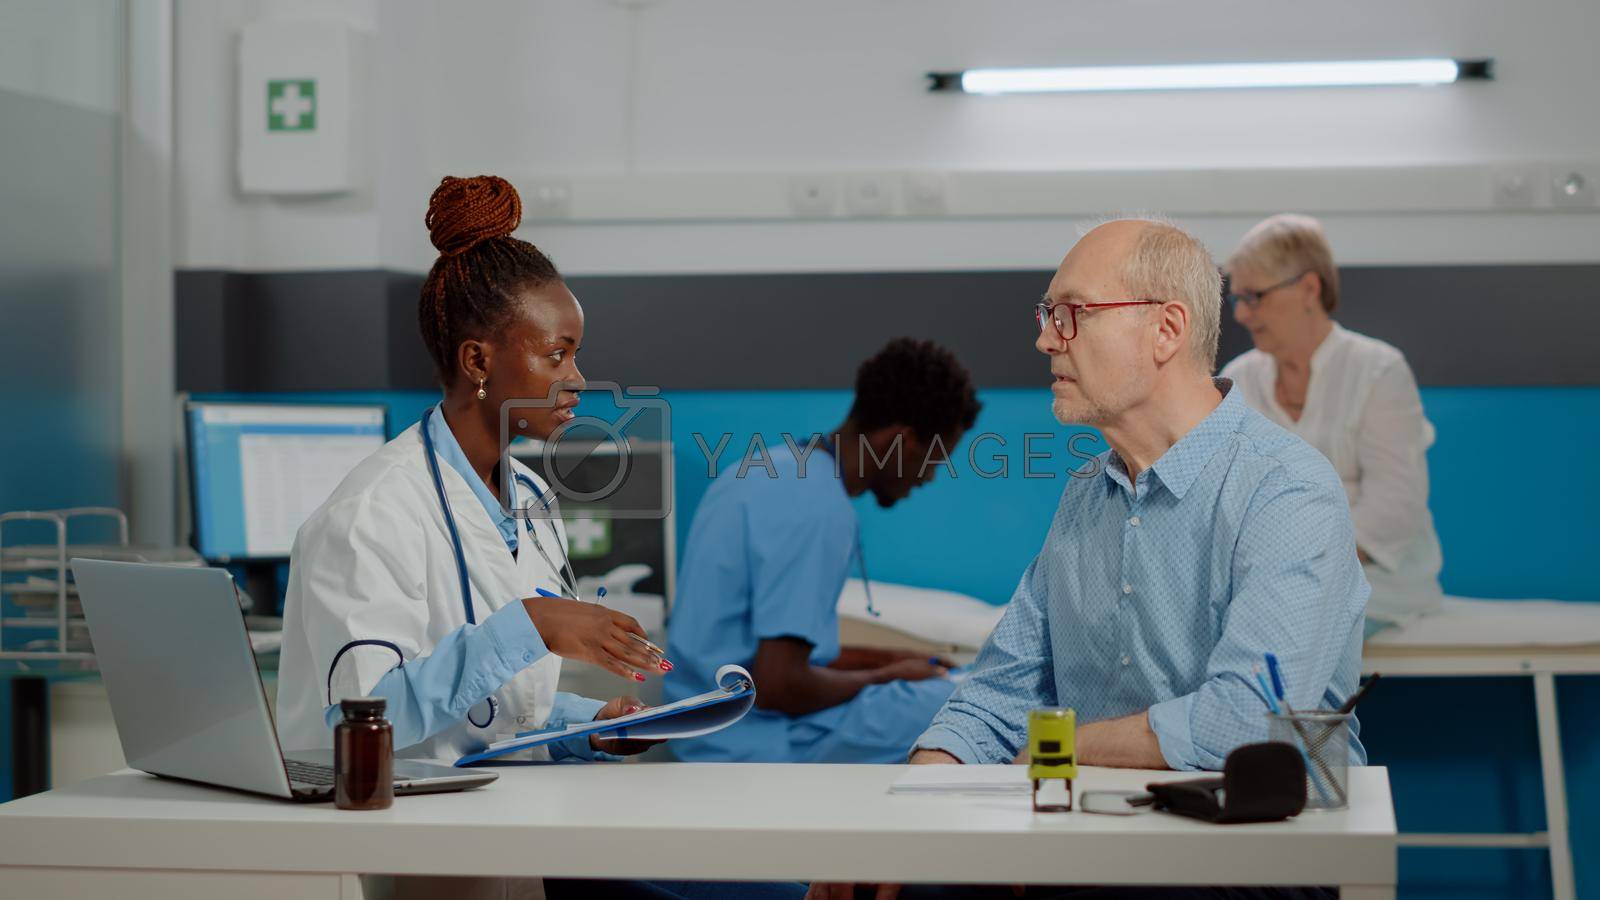 Healthcare specialist discussing with old patient at desk in medical office. Doctor checking disease symptoms for senior person while nurse and elder woman sitting in background